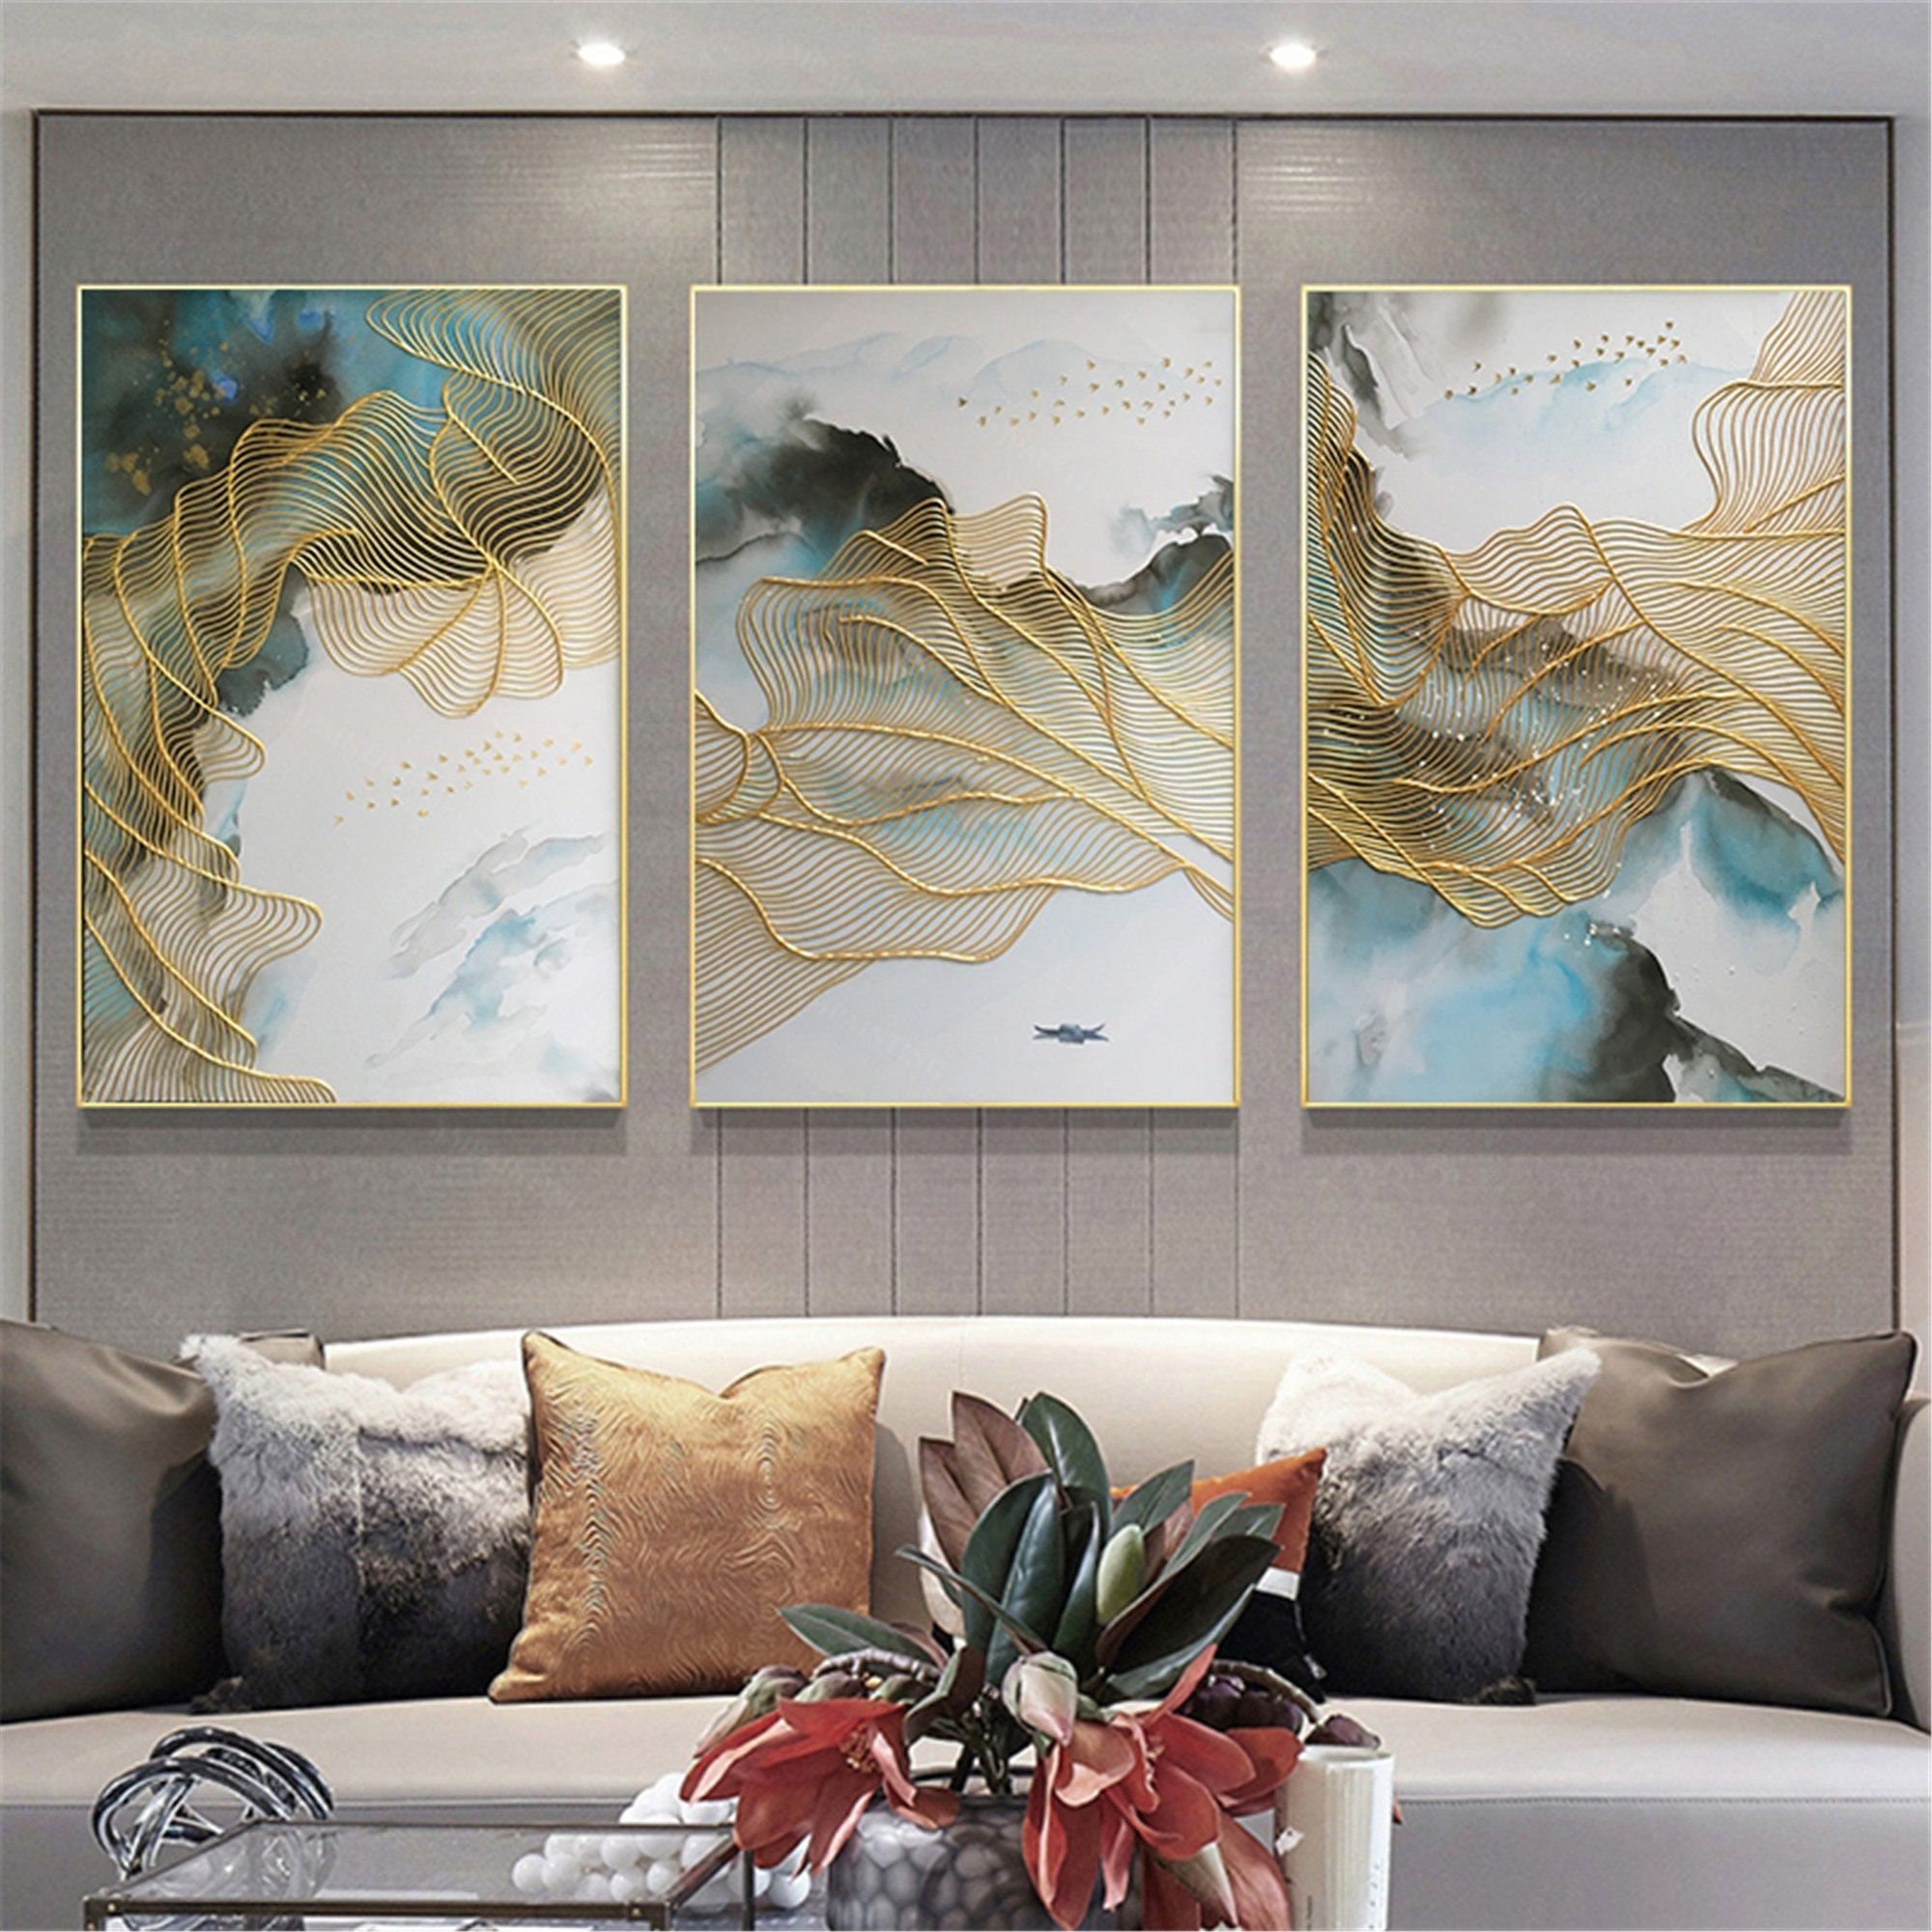 3 Pieces Gold Lines Abstract Painting On Canvas Framed Wall – Etsy Throughout Abstract Flow Wall Art (View 12 of 15)